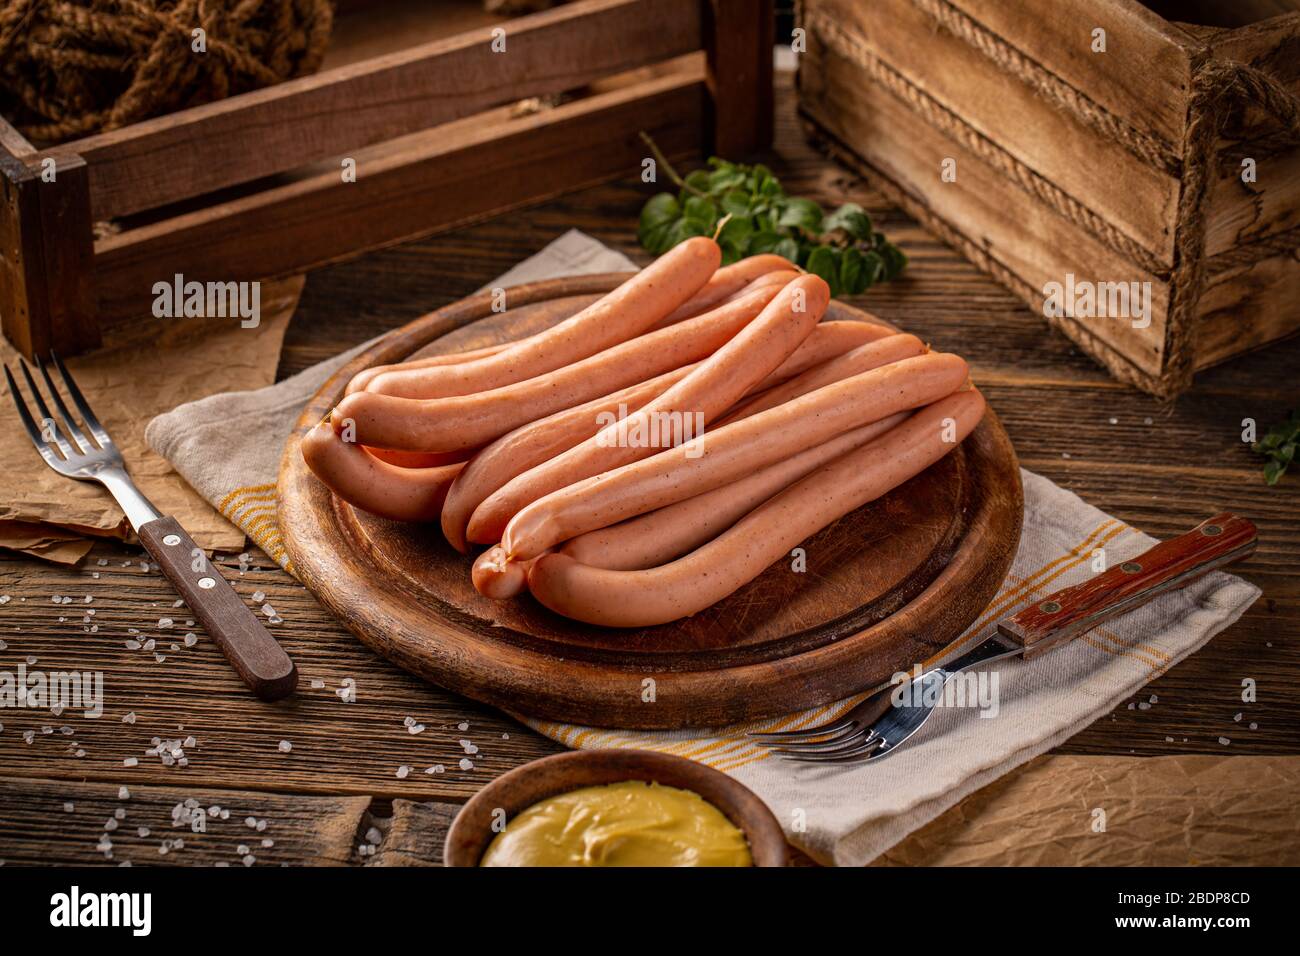 Fresh boiled Wiener sausages on wooden cutting board Stock Photo